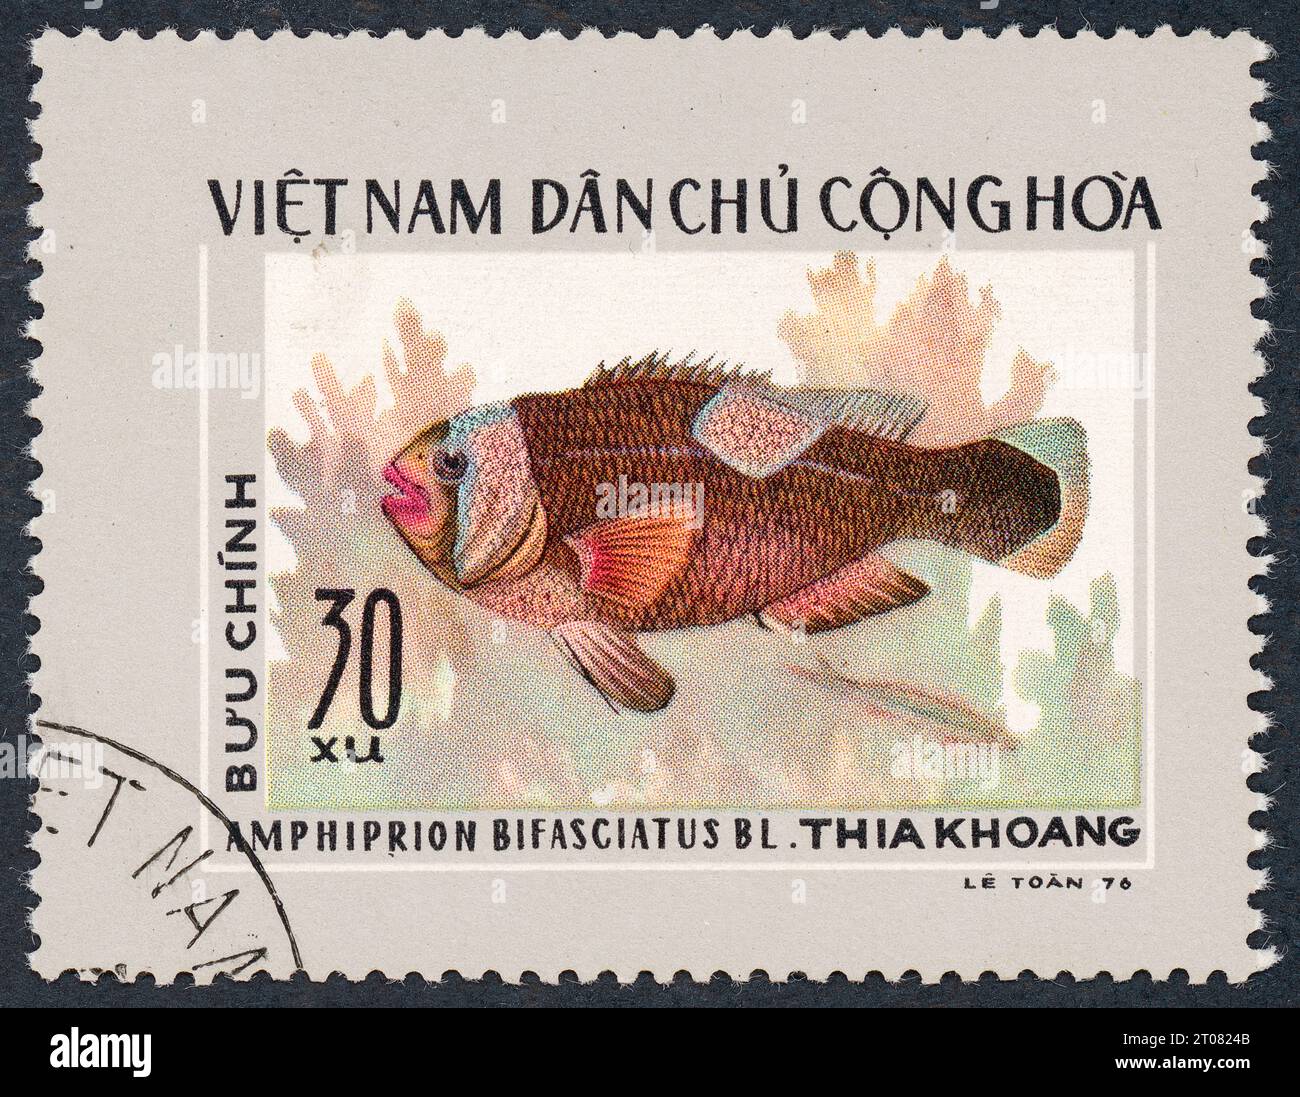 Saddleback clownfish (Amphiprion polymnus, also Amphiprion bifasciatus). Postage stamp issued in Vietnam in 1976. Stock Photo